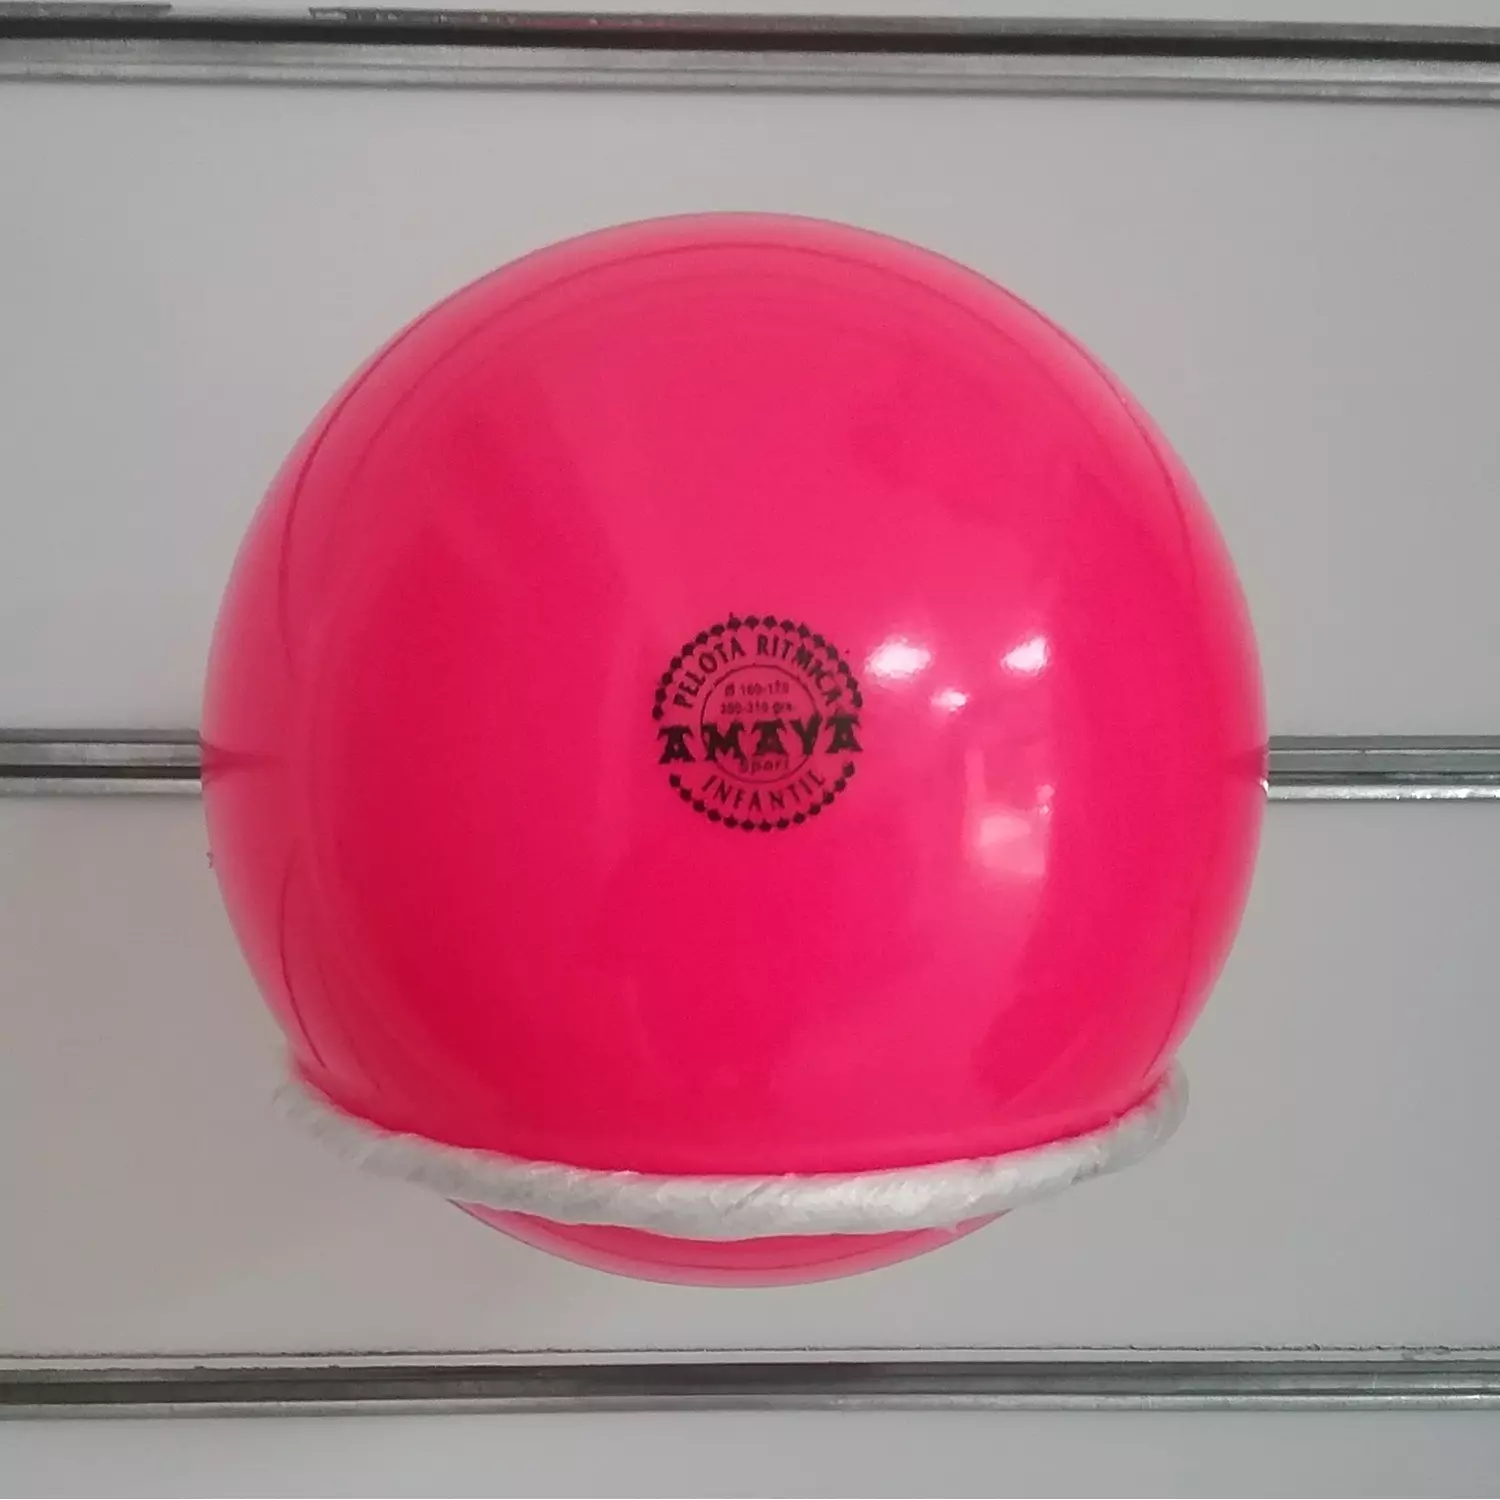 Amaya-Ball for Hobby 15-17cm hover image